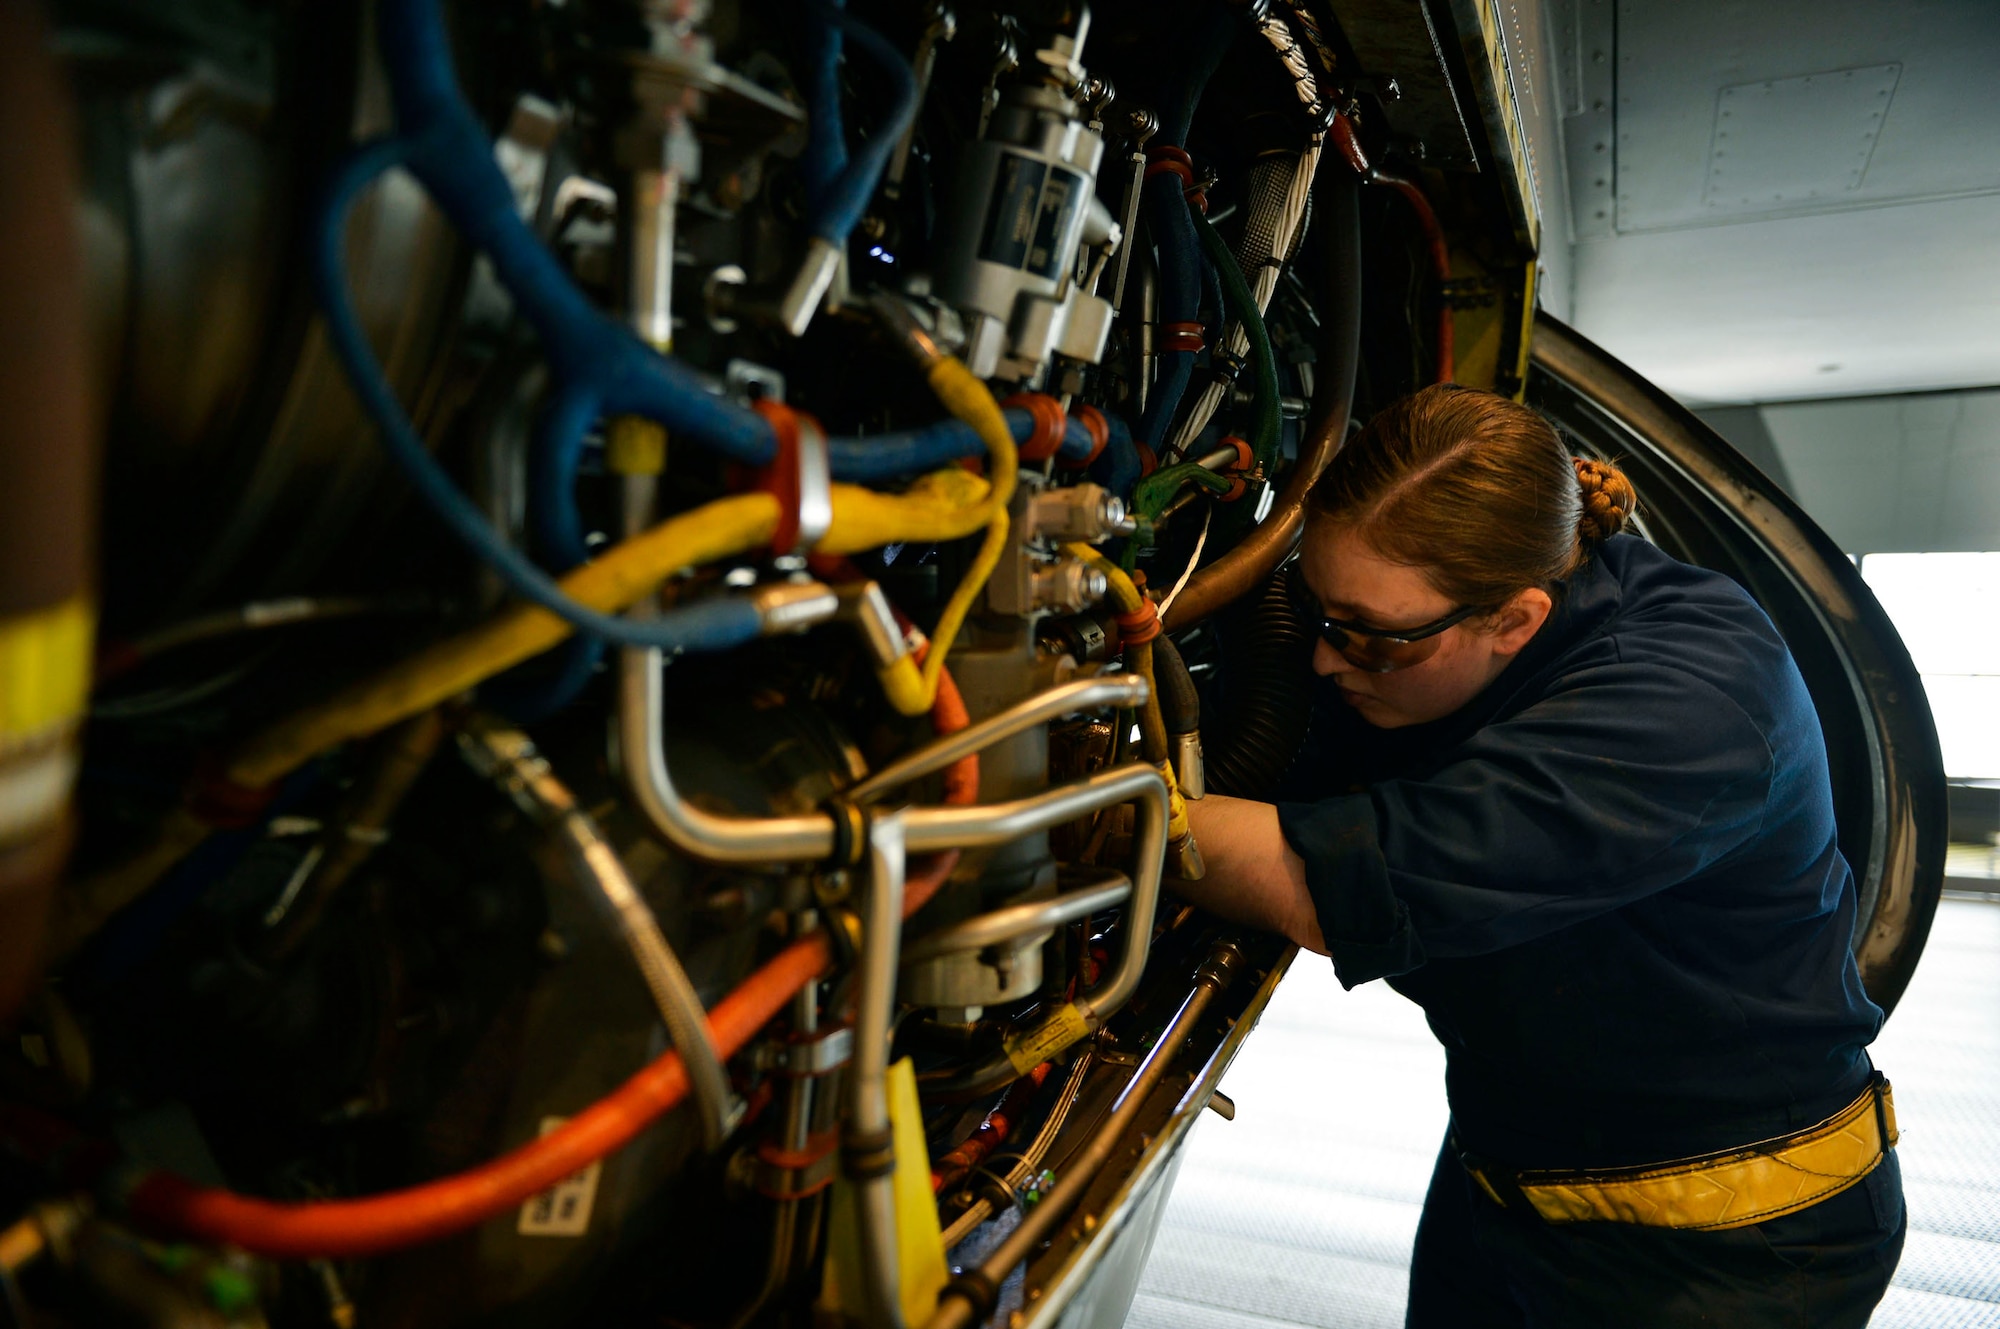 U.S. Air Force Staff Sgt. Rachel Revels, 86th Maintenance Squadron aerospace propulsion specialist, conducts maintenance work on a C-130J Super Hercules on Ramstein Air Base, Germany, April 10, 2018. As the latest model in the C-130 series, the C-130J features a longer fuselage, upgraded avionics, and improved flight and landing performance. (U.S. Air Force photo by Senior Airman Joshua Magbanua)